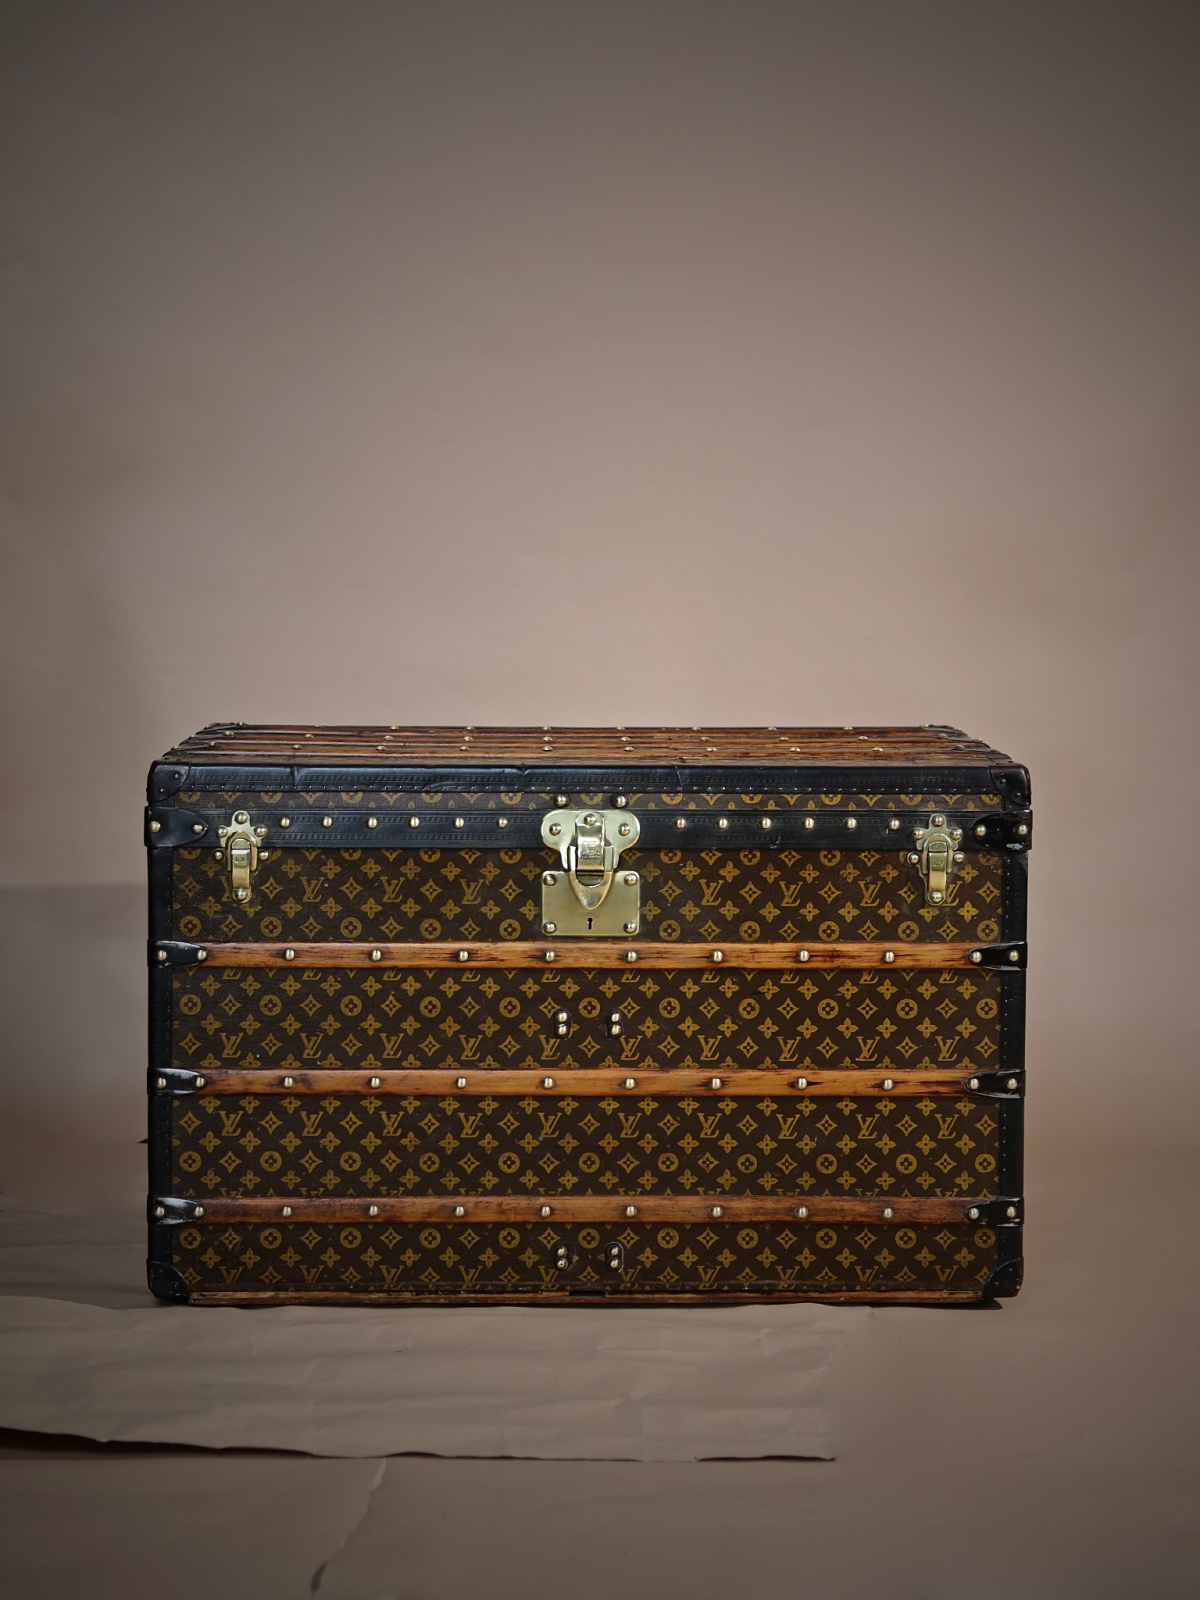 the-well-traveled-trunk-louis-vuitton-thumbnail-product-5745-1